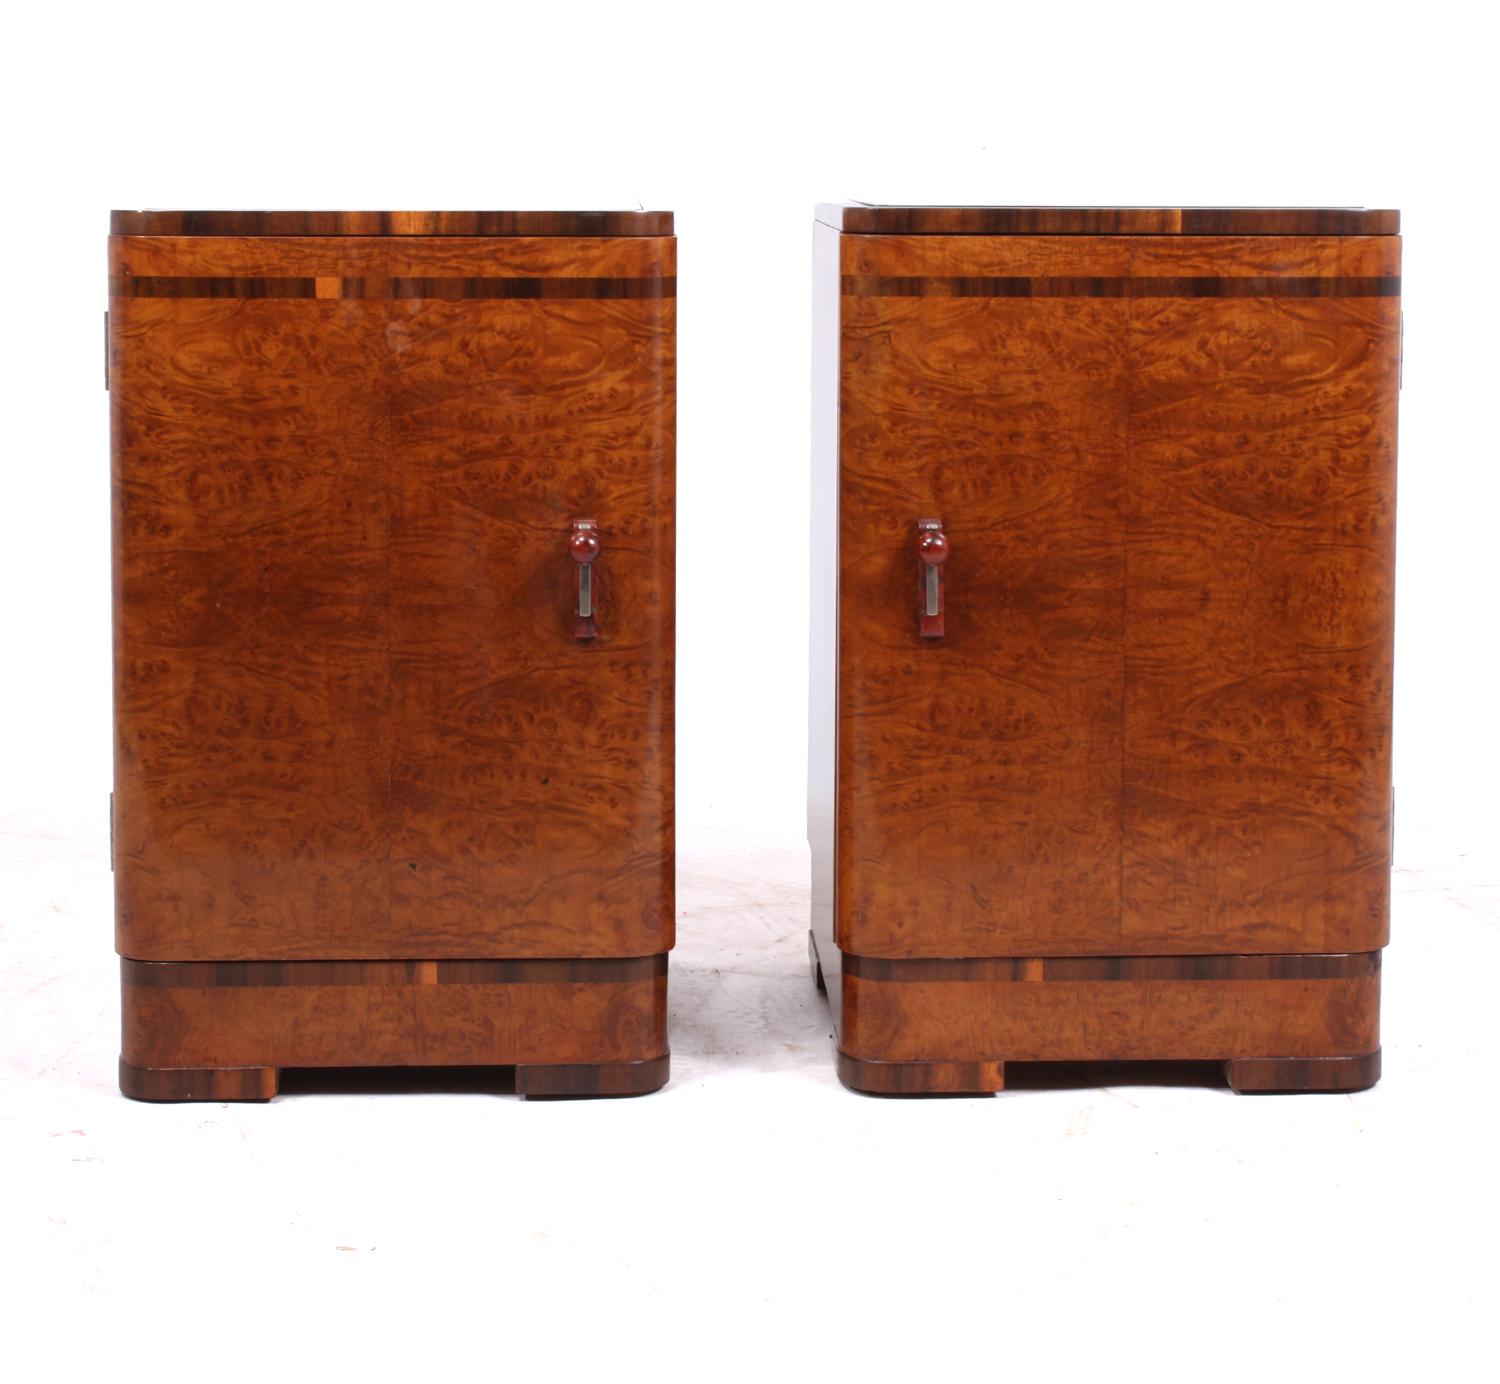 A pair of Art Deco bedside cabinets in burr maple.
A lovely pair of English original 1930s Art Deco bedside cabinets in burr maple with walnut cross-banding, they have black glass mirror tops and decorative bake-lite handles, one cabinet has a